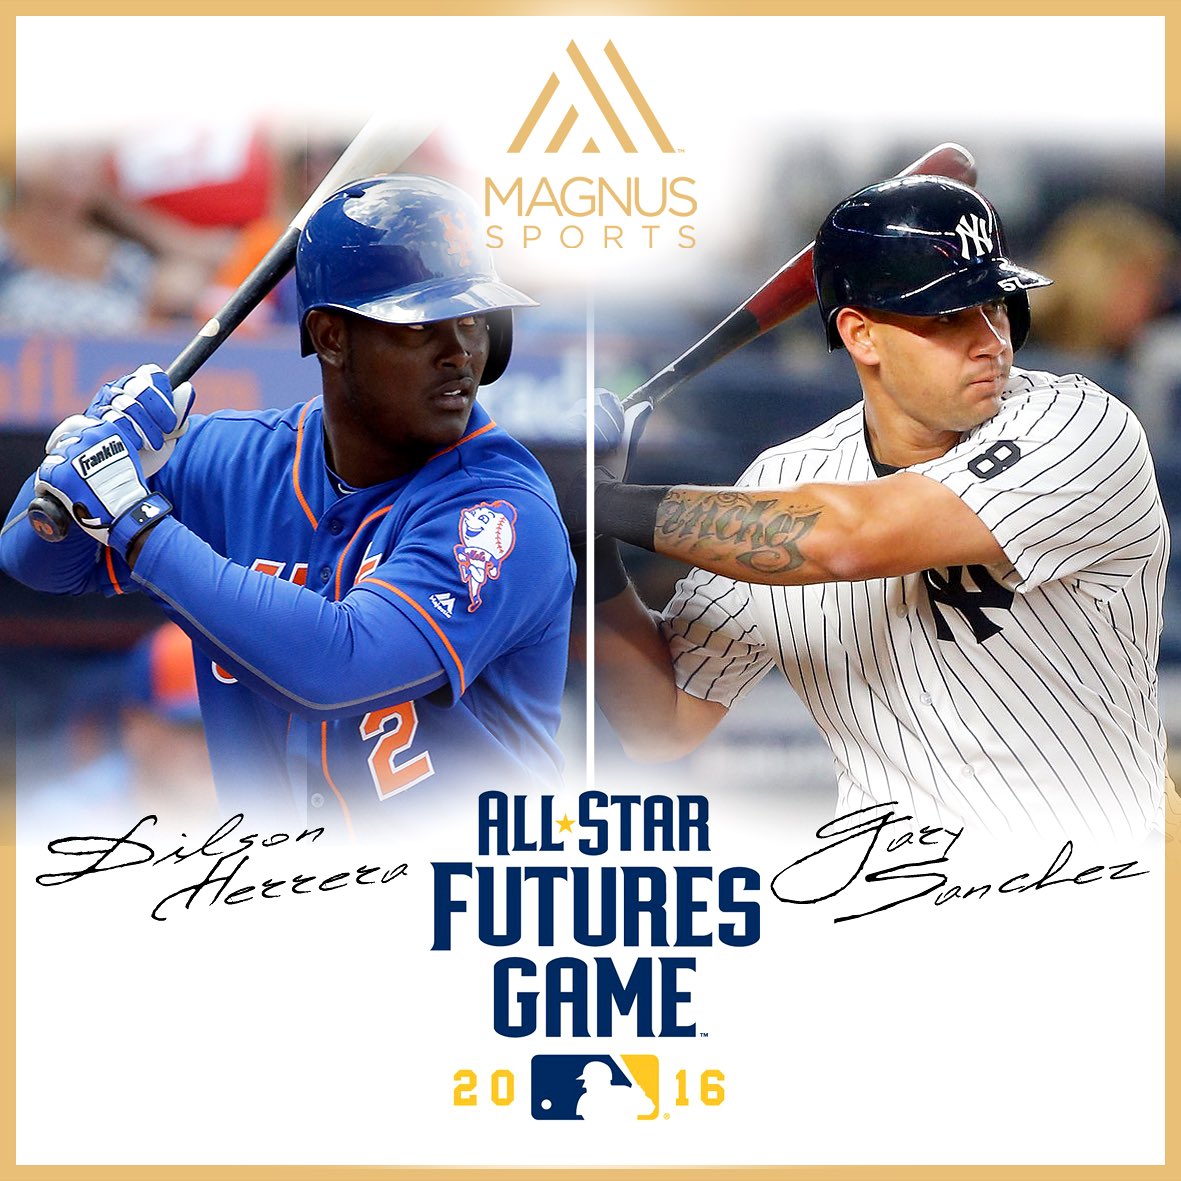 So proud of @Dilson_H & @ElGarySanchez representing #Magnus Sports @MLB All Star Futures Game today! @magnusmedia https://t.co/M7TbbyxTB0